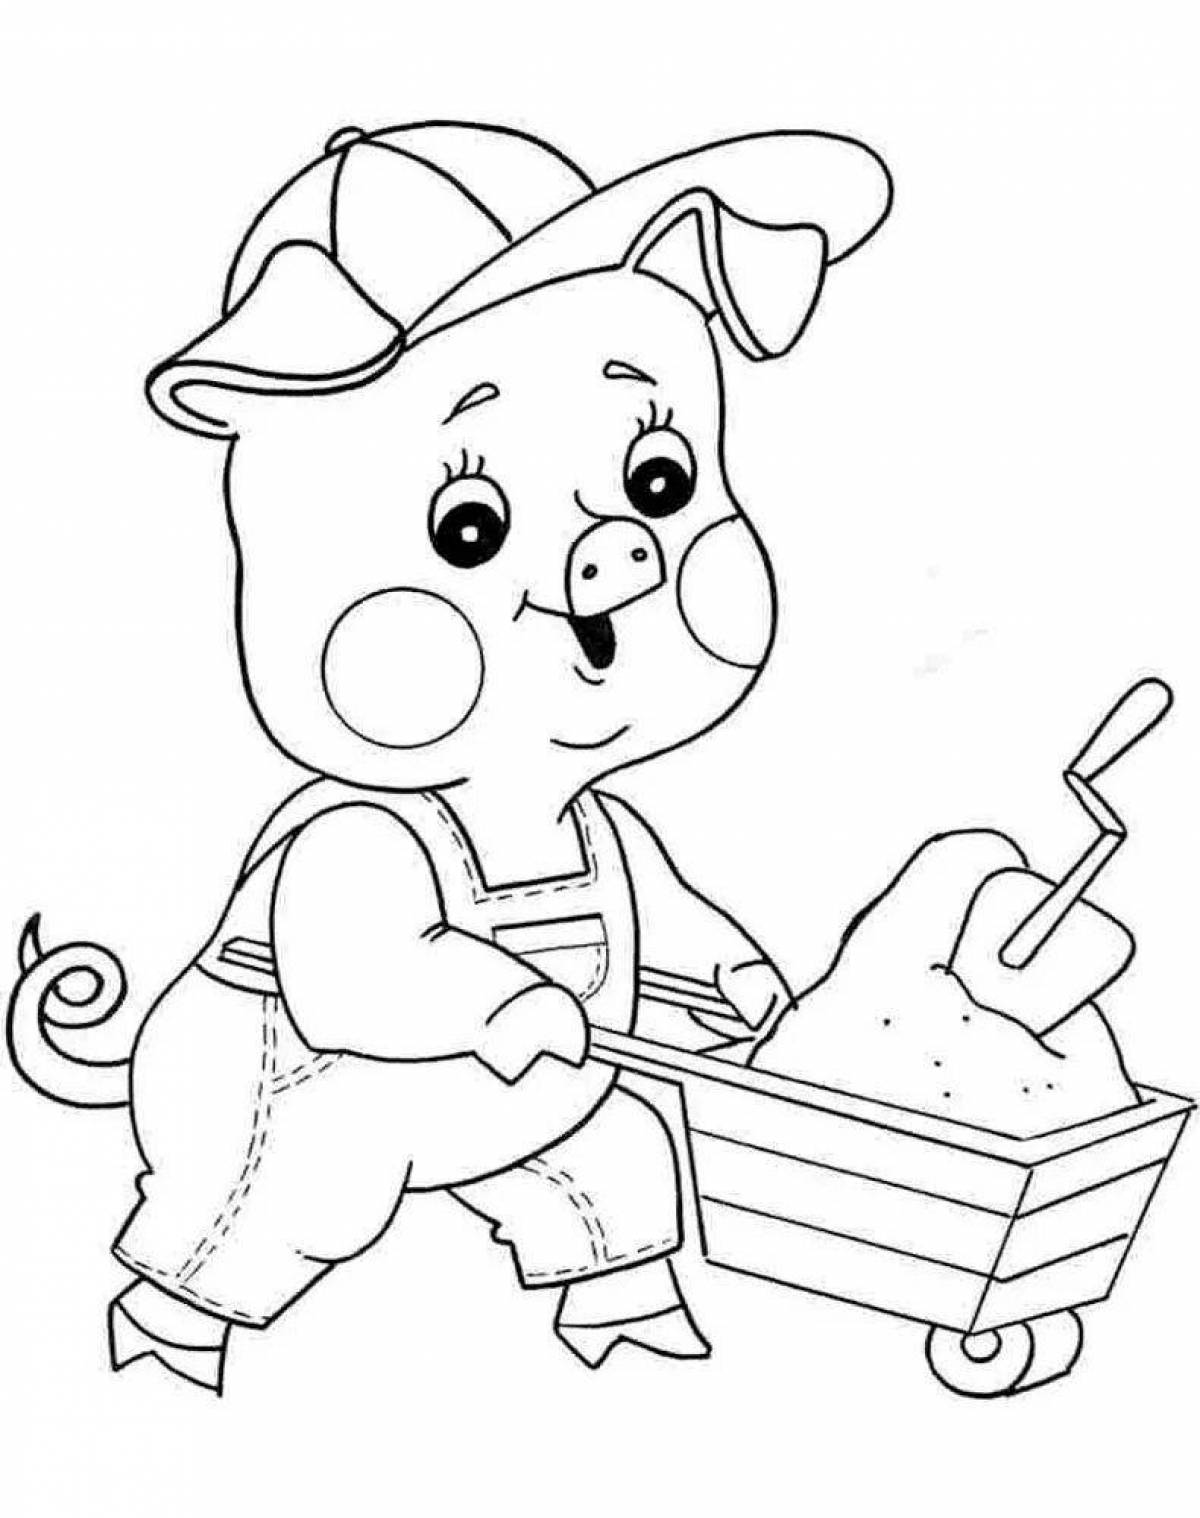 Fabulous fairy tale character coloring pages